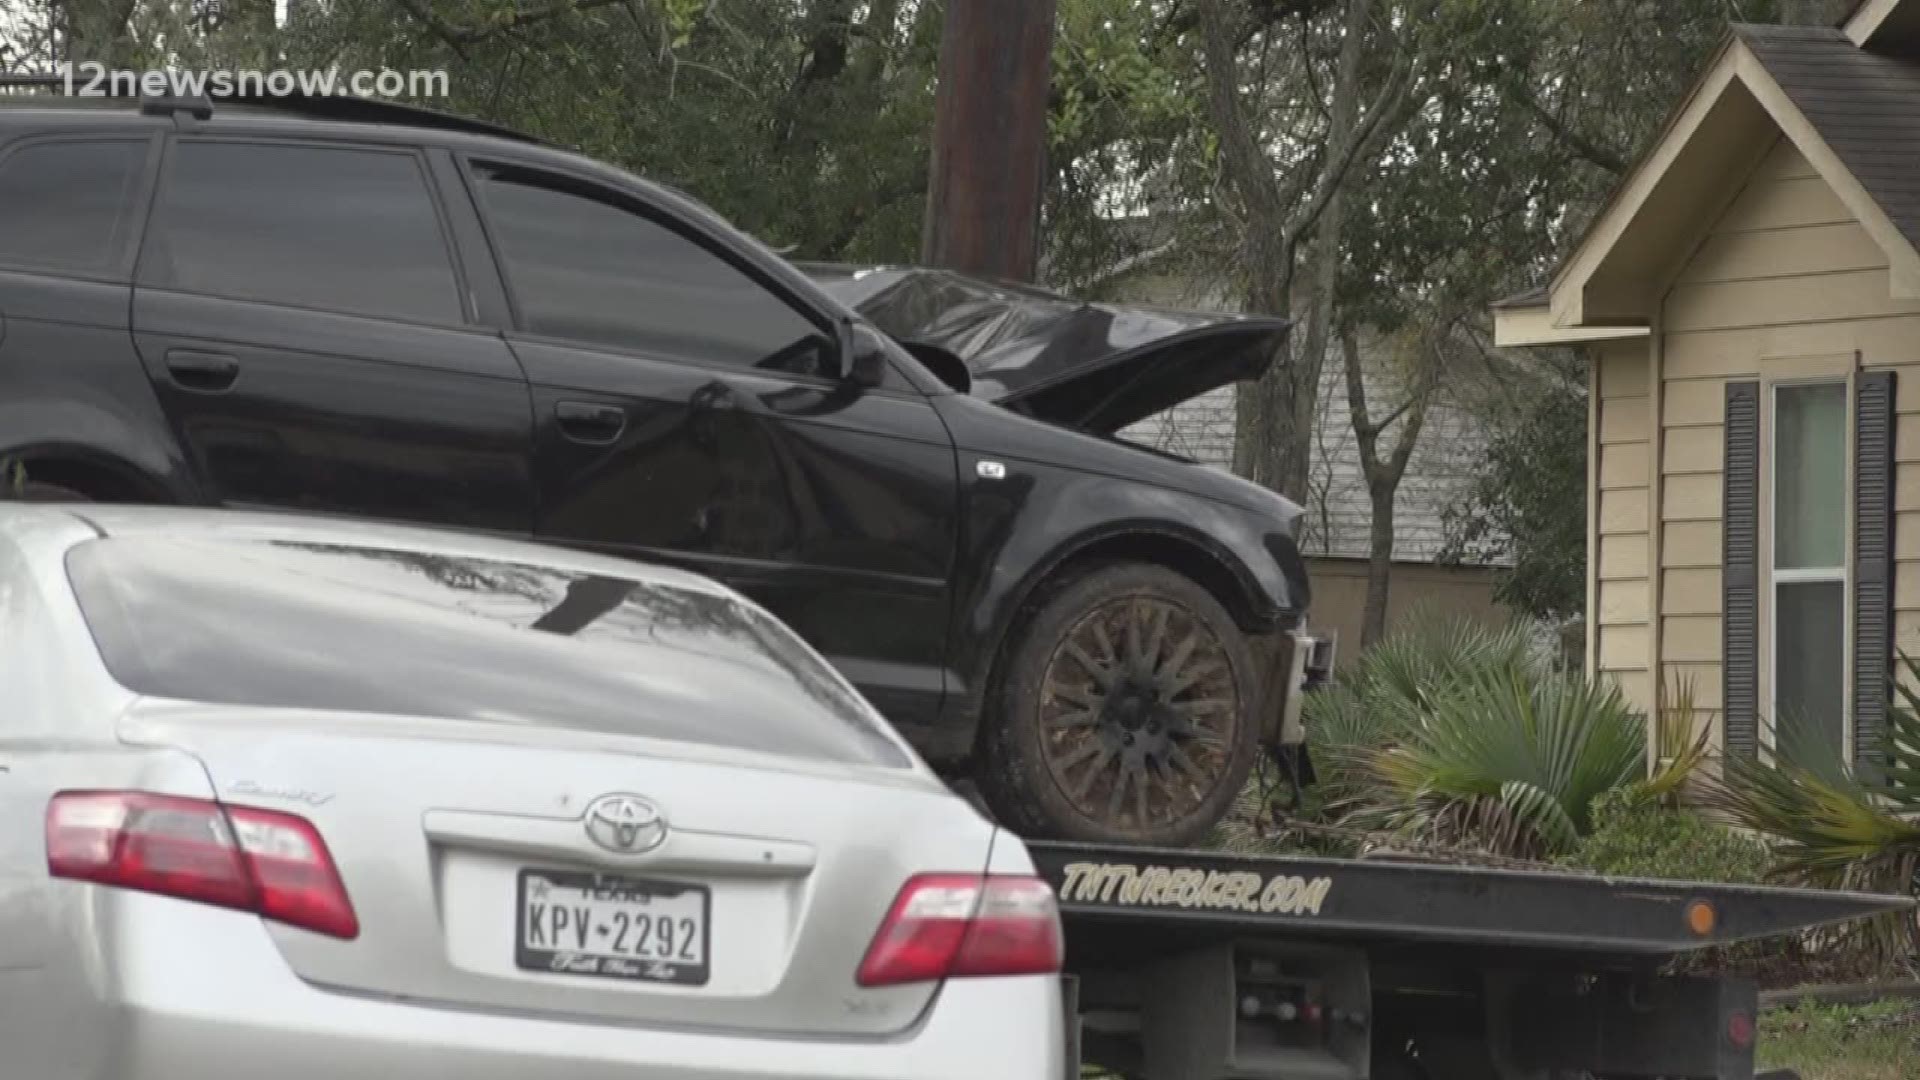 The suspect was leading police on a chase when he crashed into the home around 3 p.m.